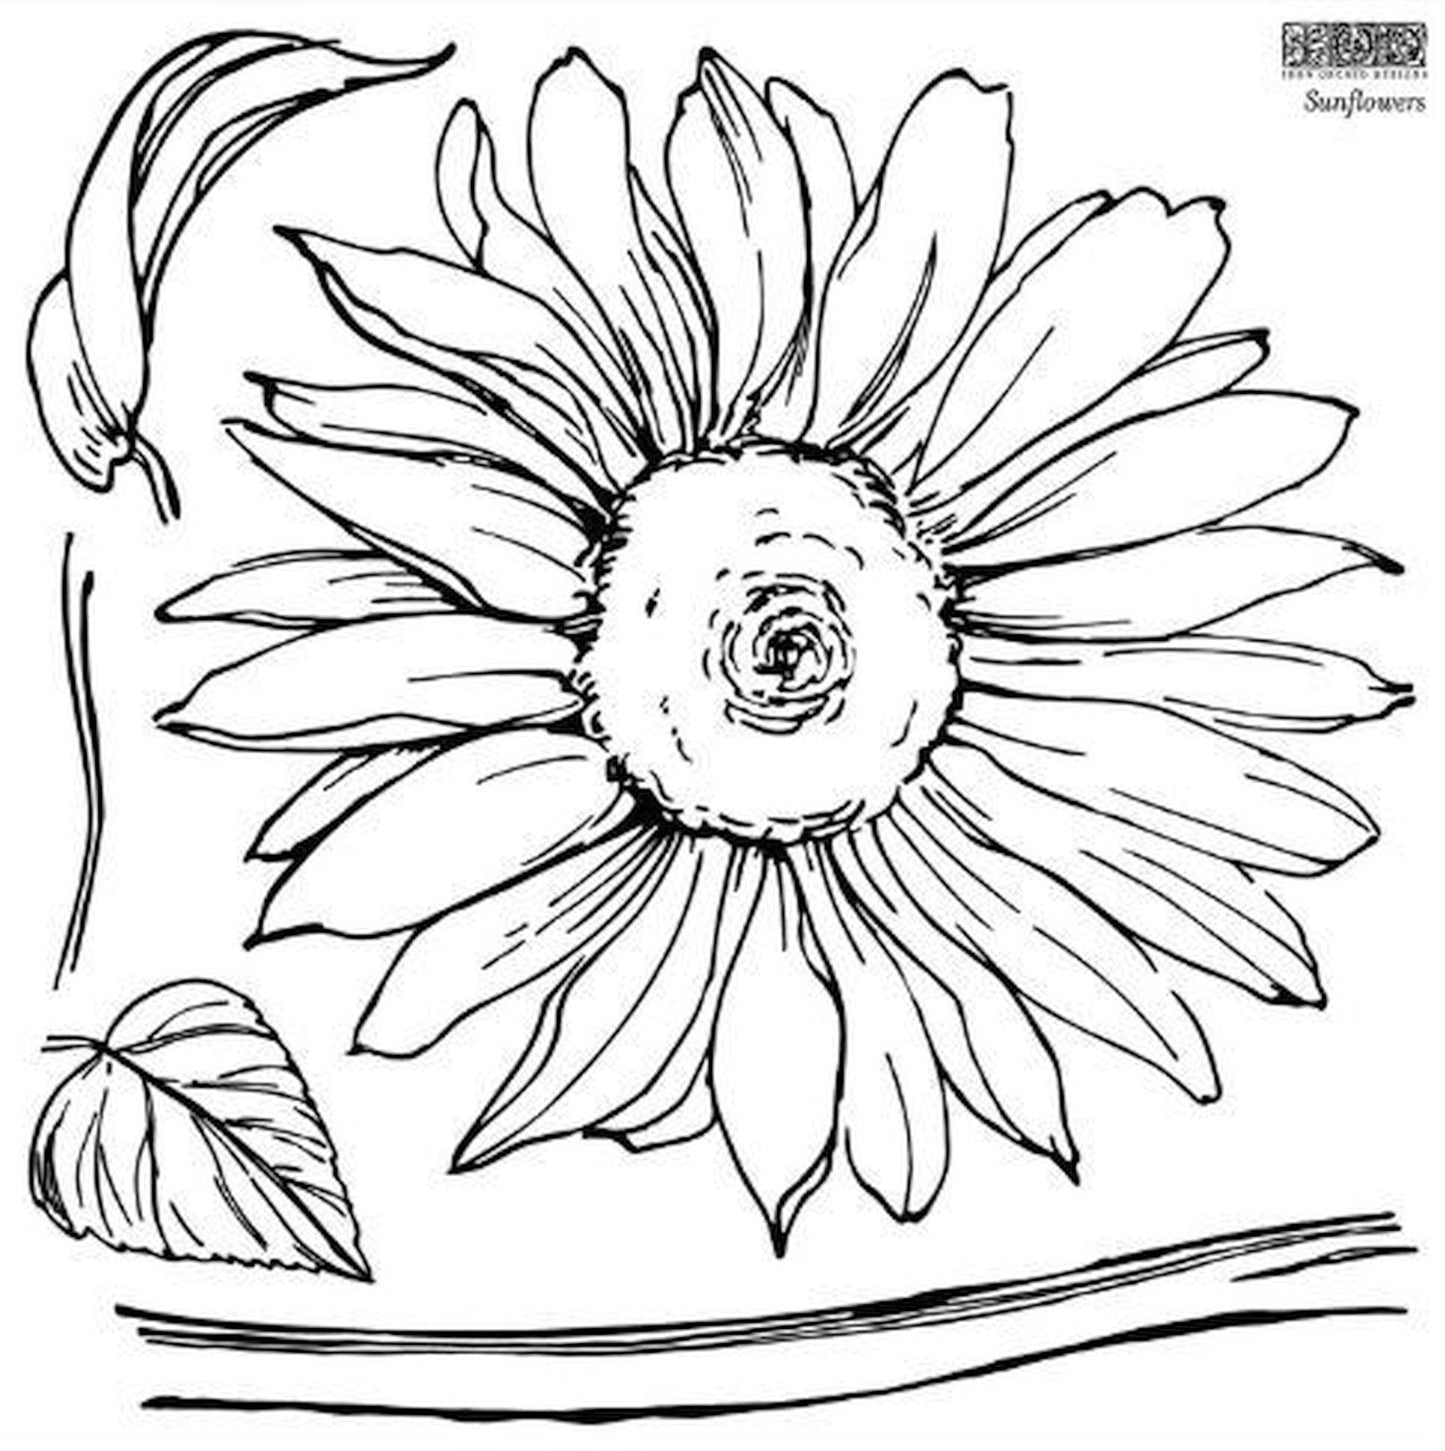 Iron Orchid Designs - Sunflowers Decor Stamp - Rustic River Home